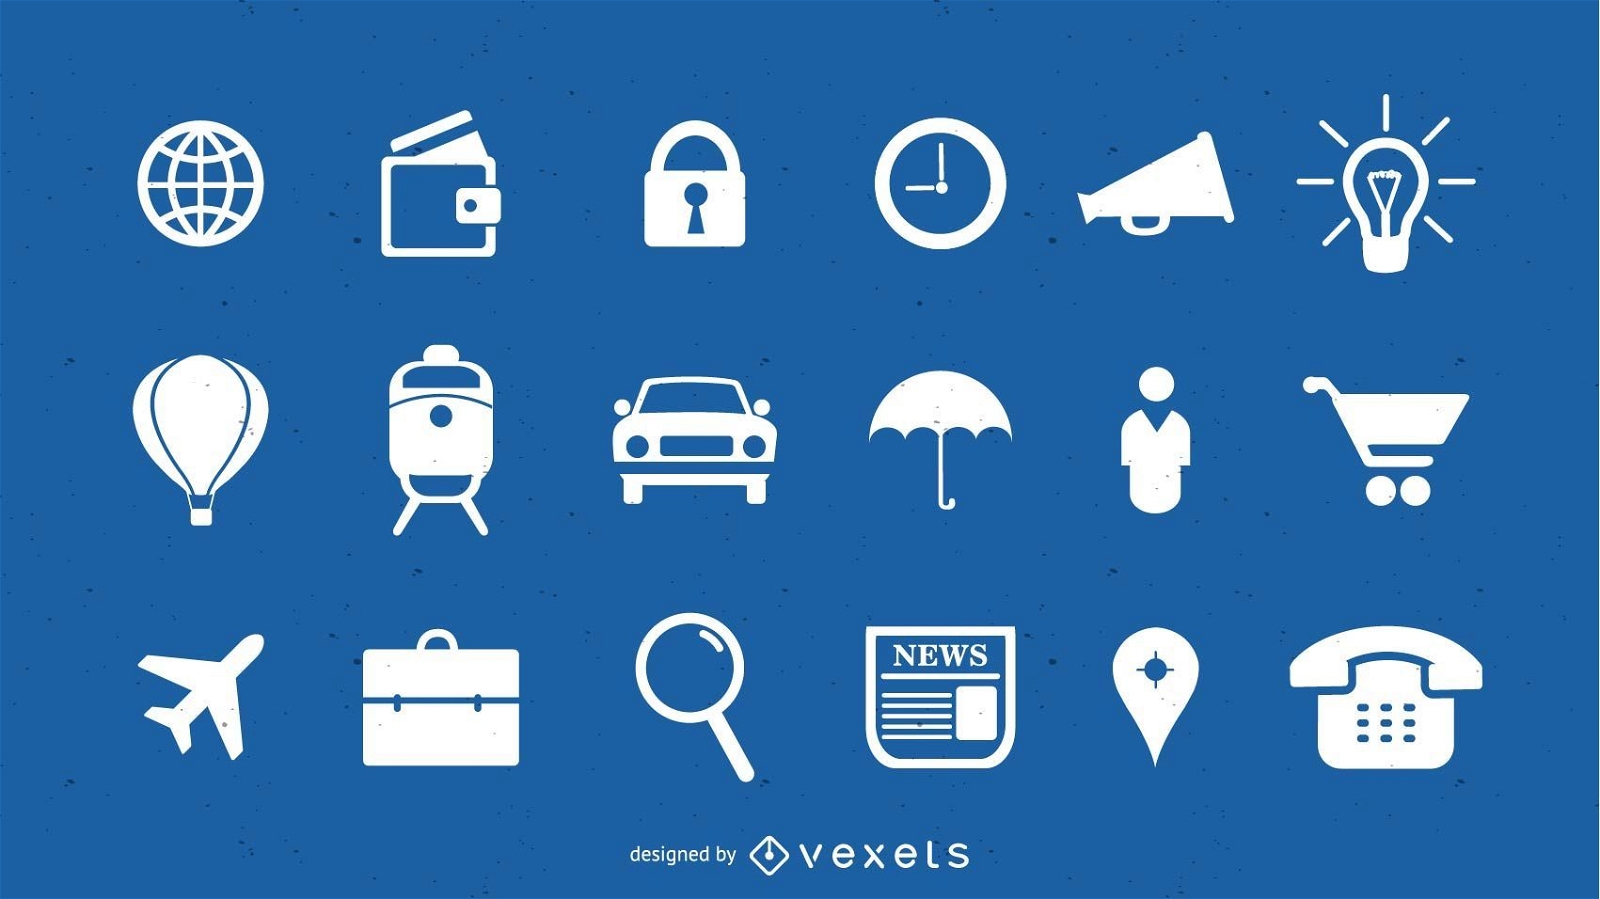 Free Vector Icons Pack 